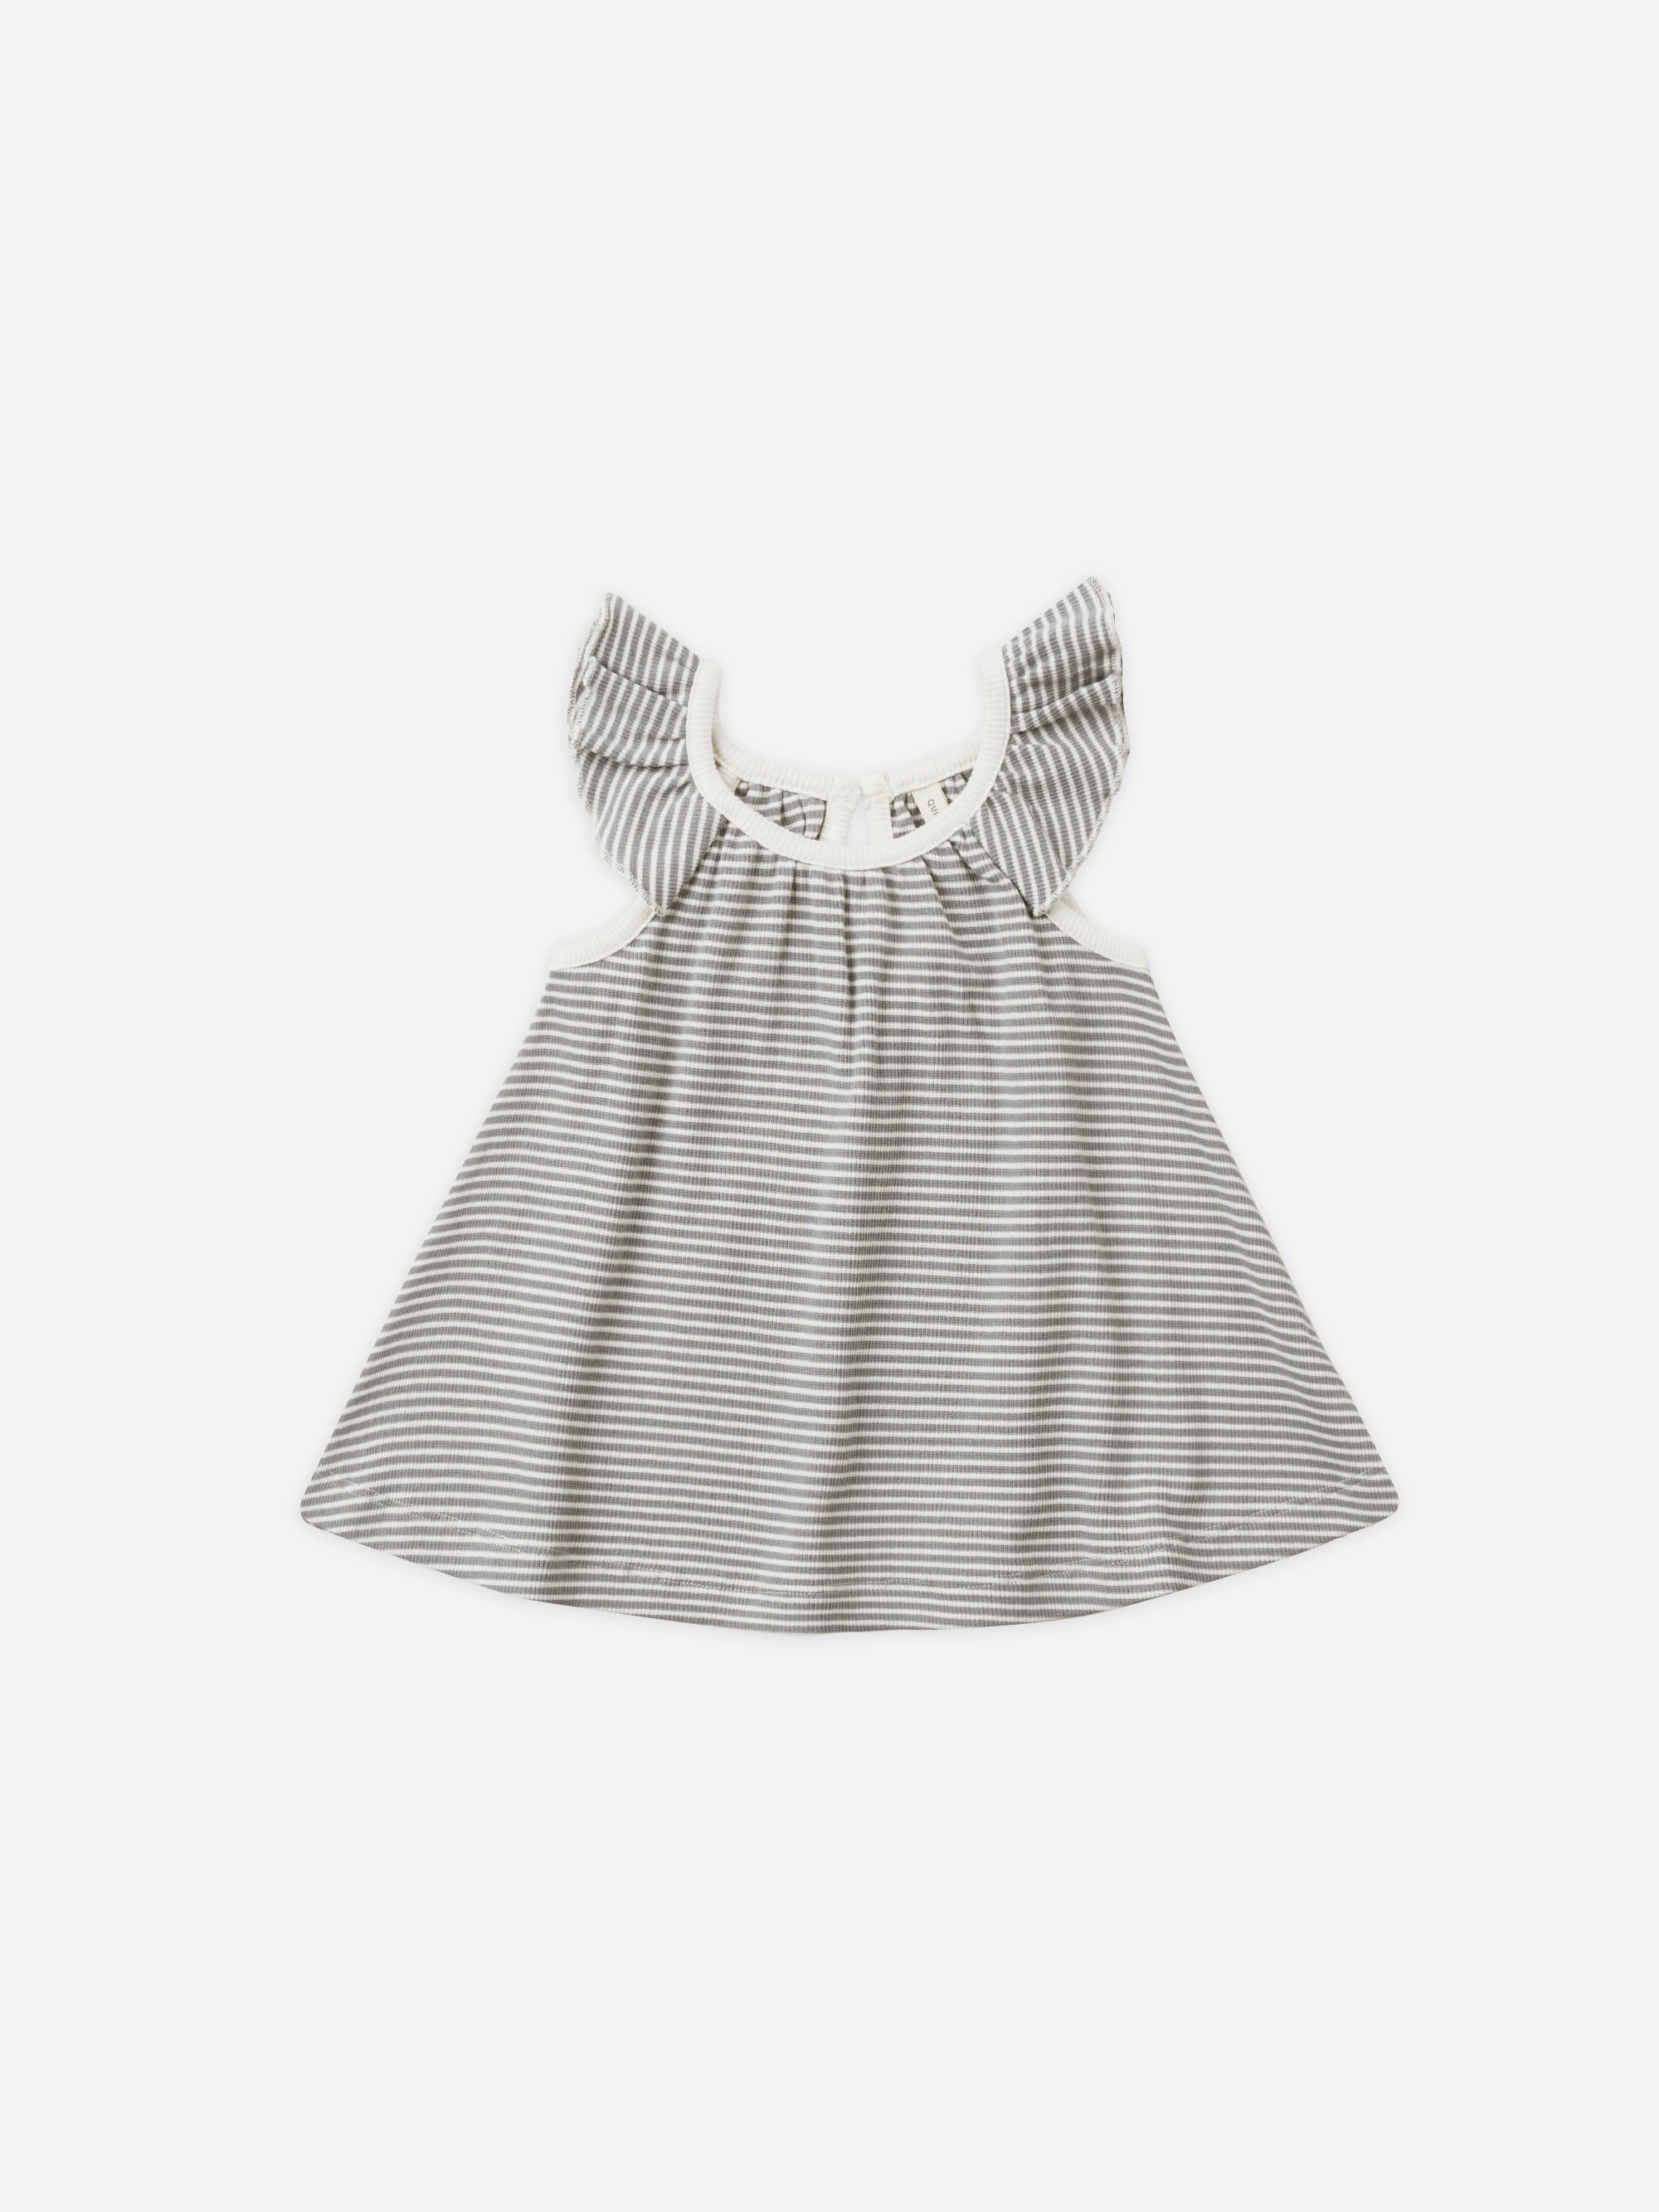 Ruffle Swing Dress || Lagoon Micro Stripe - Rylee + Cru | Kids Clothes | Trendy Baby Clothes | Modern Infant Outfits |